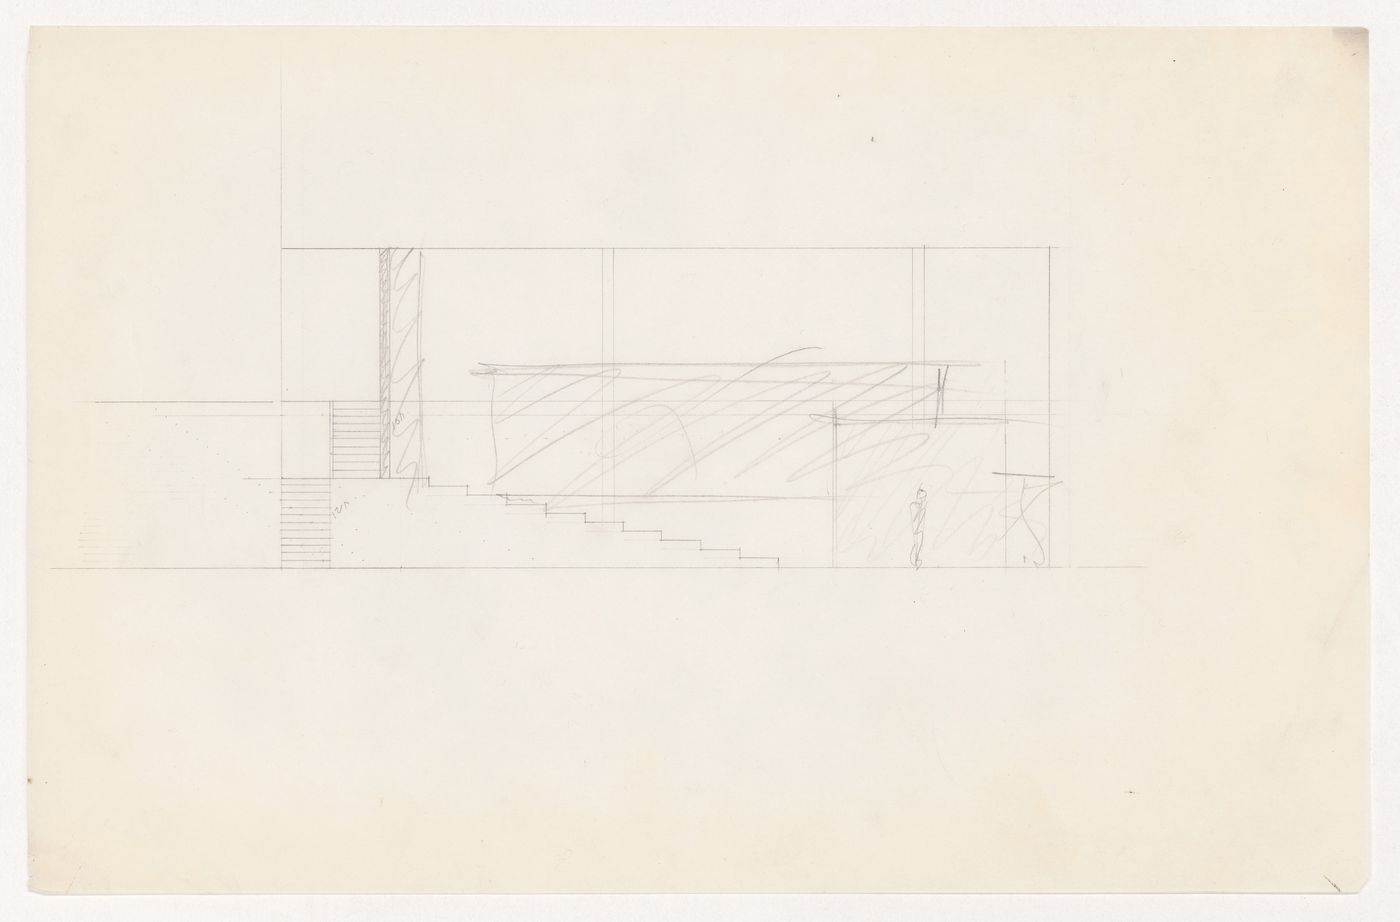 Interior elevation showing stairs for the Metallurgy Building, Illinois Institute of Technology, Chicago